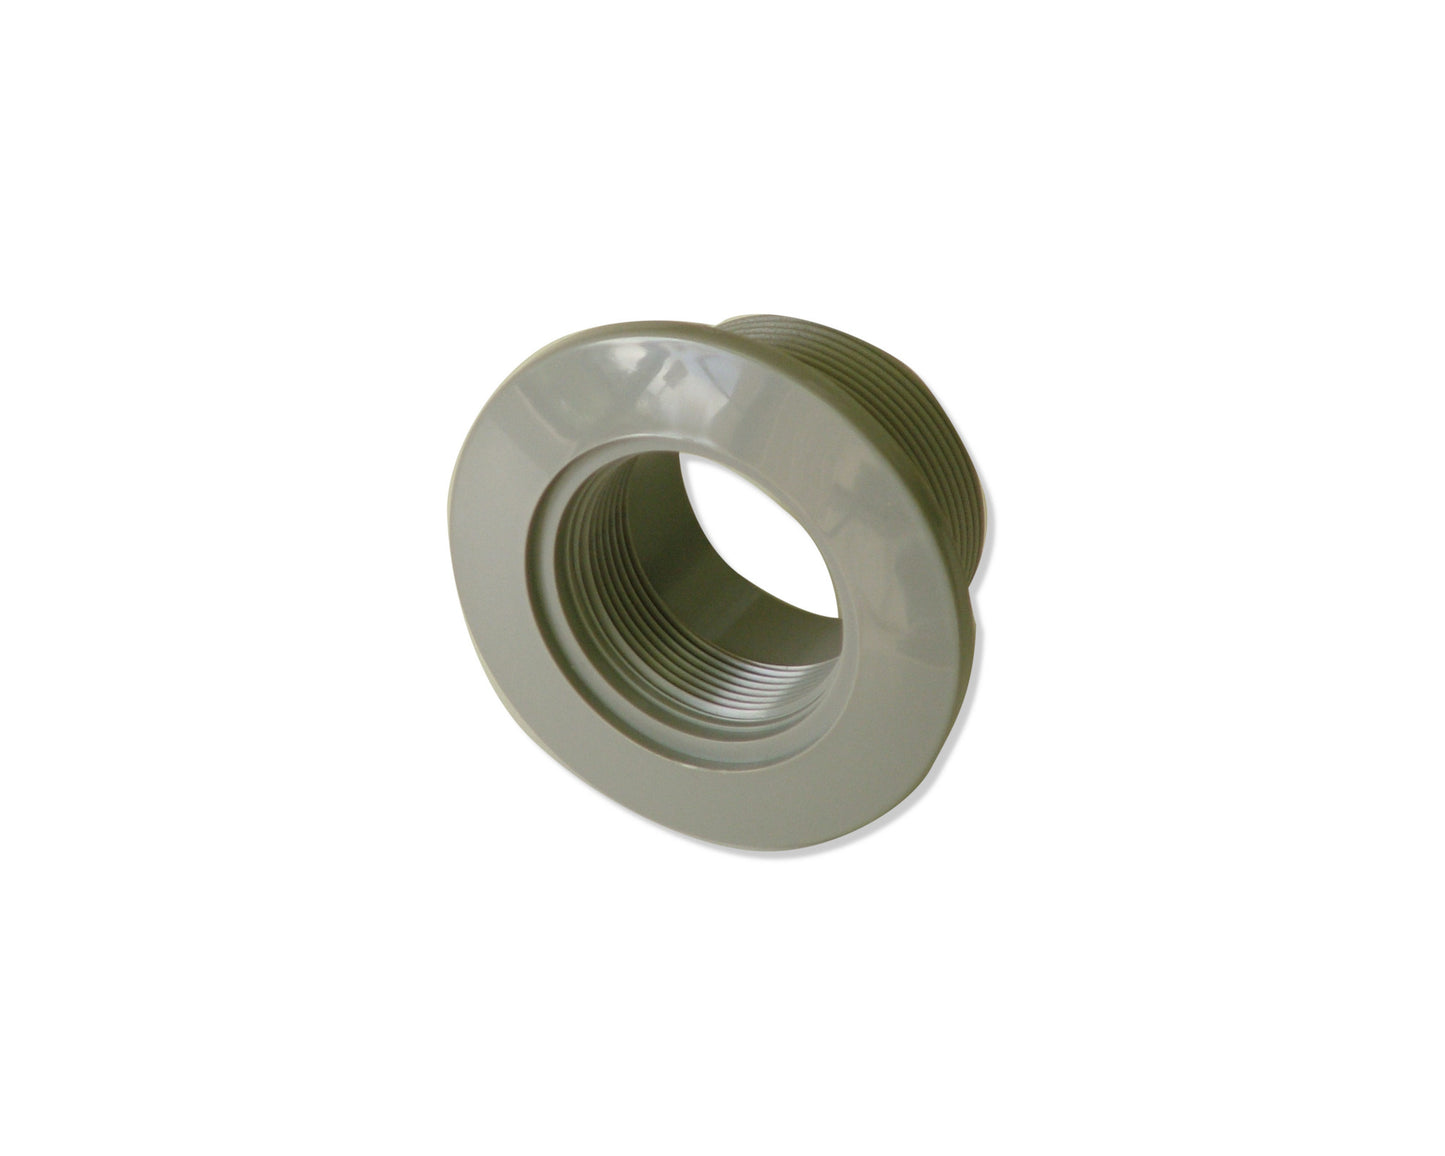 Afras Vacuum Fitting for Concrete Pools - ABS - 10054